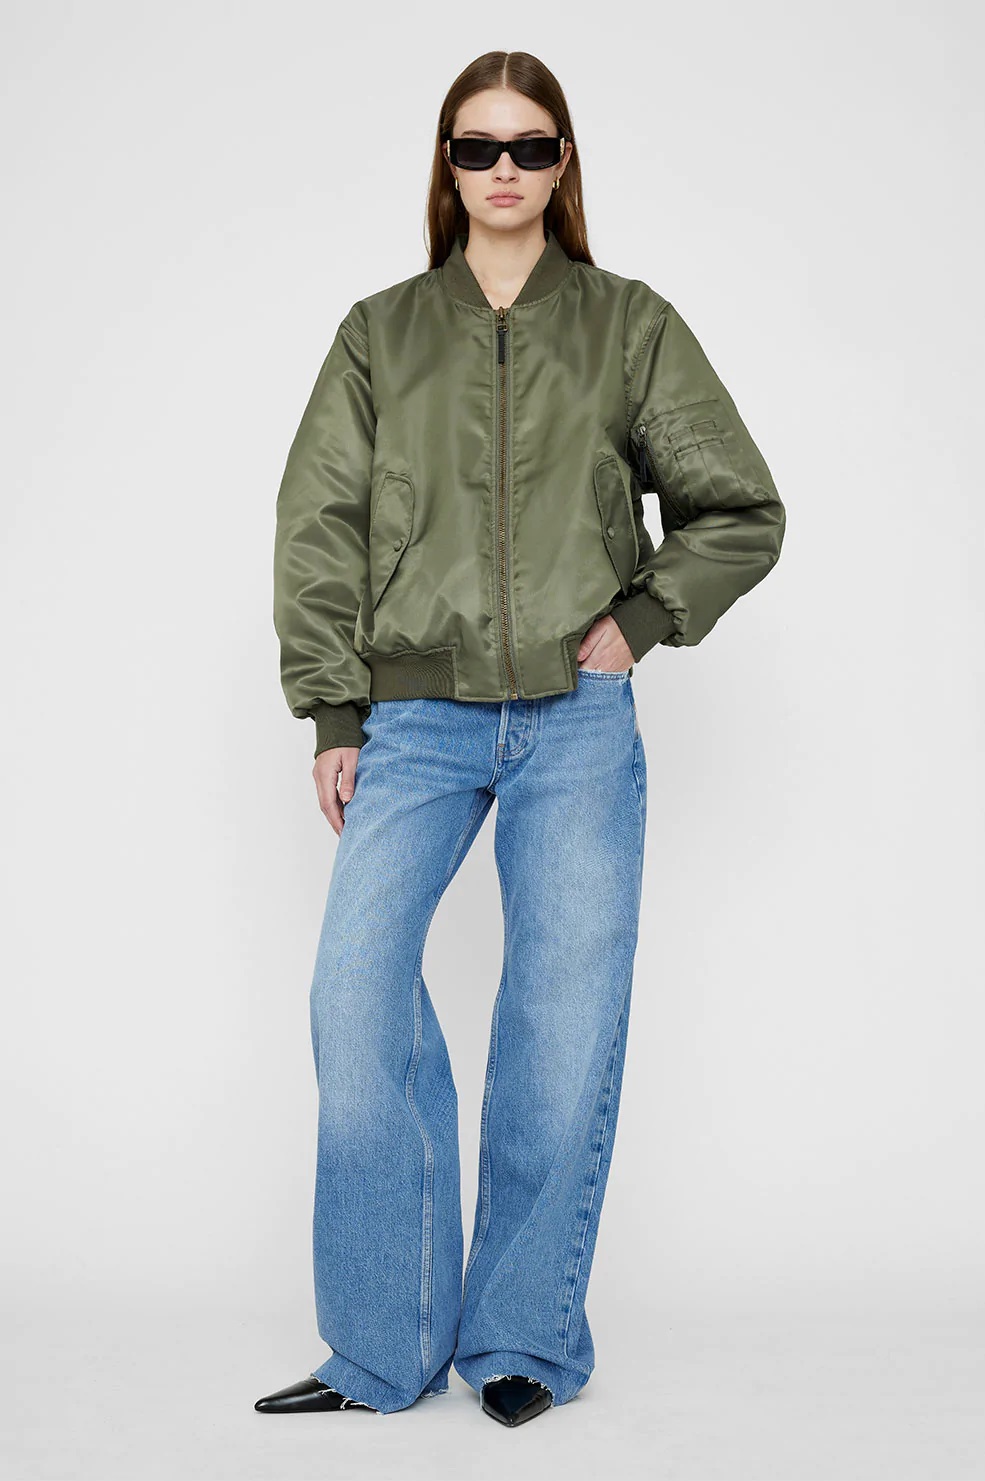 ANINE BING Leon Bomber Jacket in Army Green S